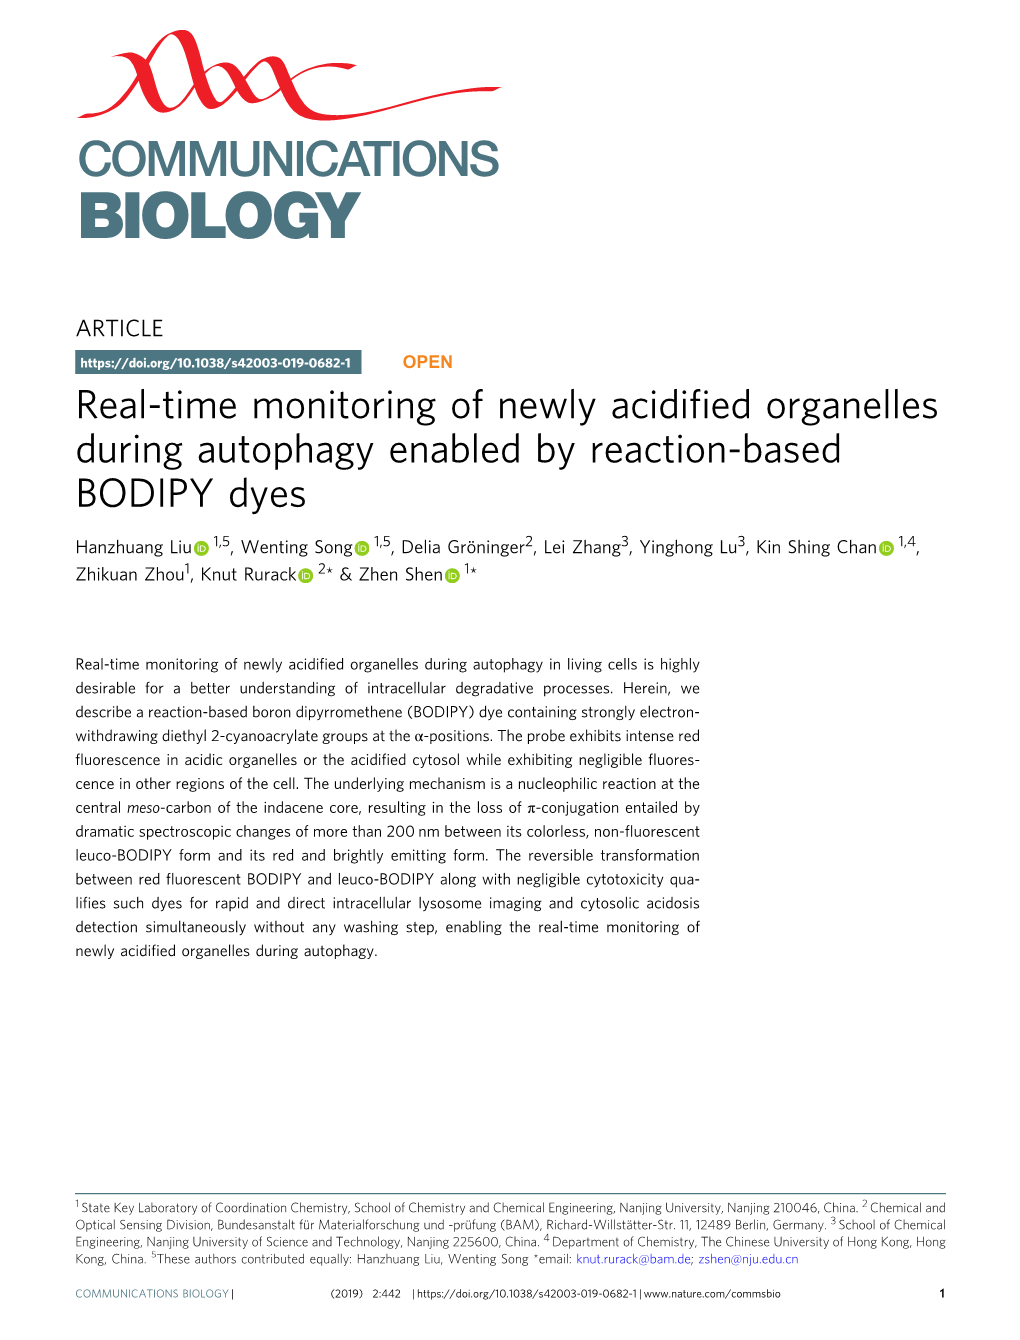 Real-Time Monitoring of Newly Acidified Organelles During Autophagy Enabled by Reaction-Based BODIPY Dyes